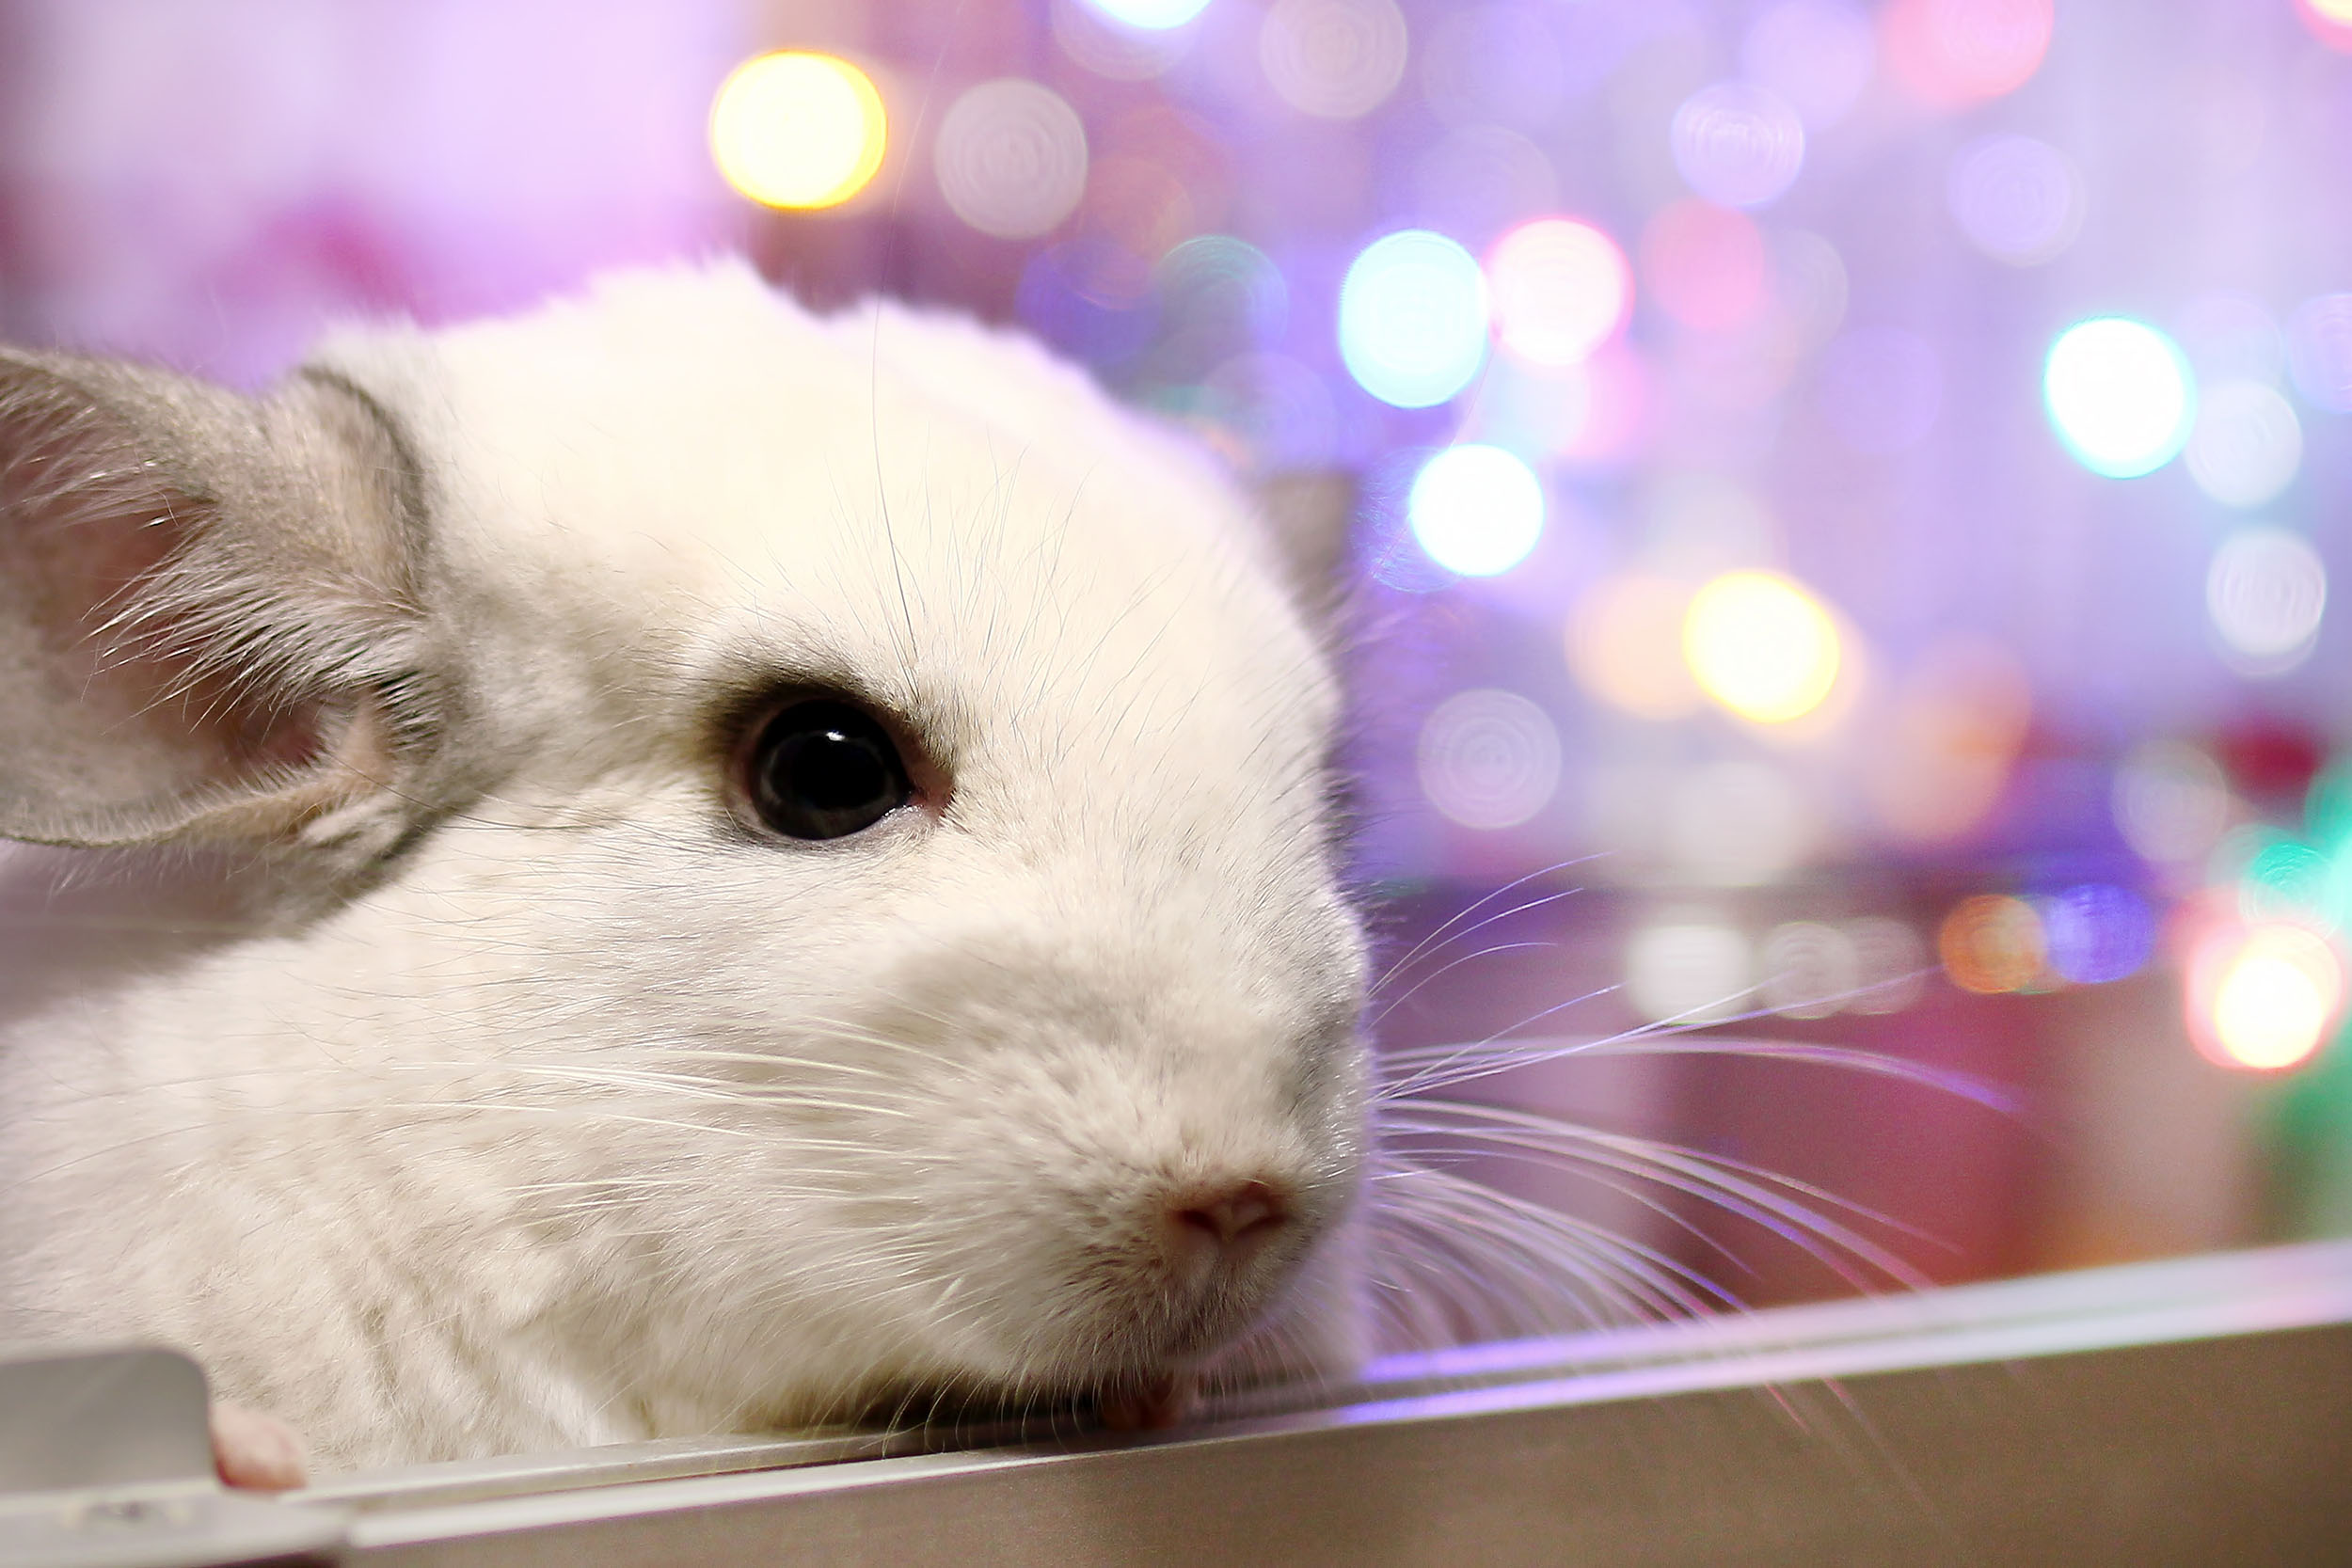 Should Your Child Take A Pet Chinchilla To School?